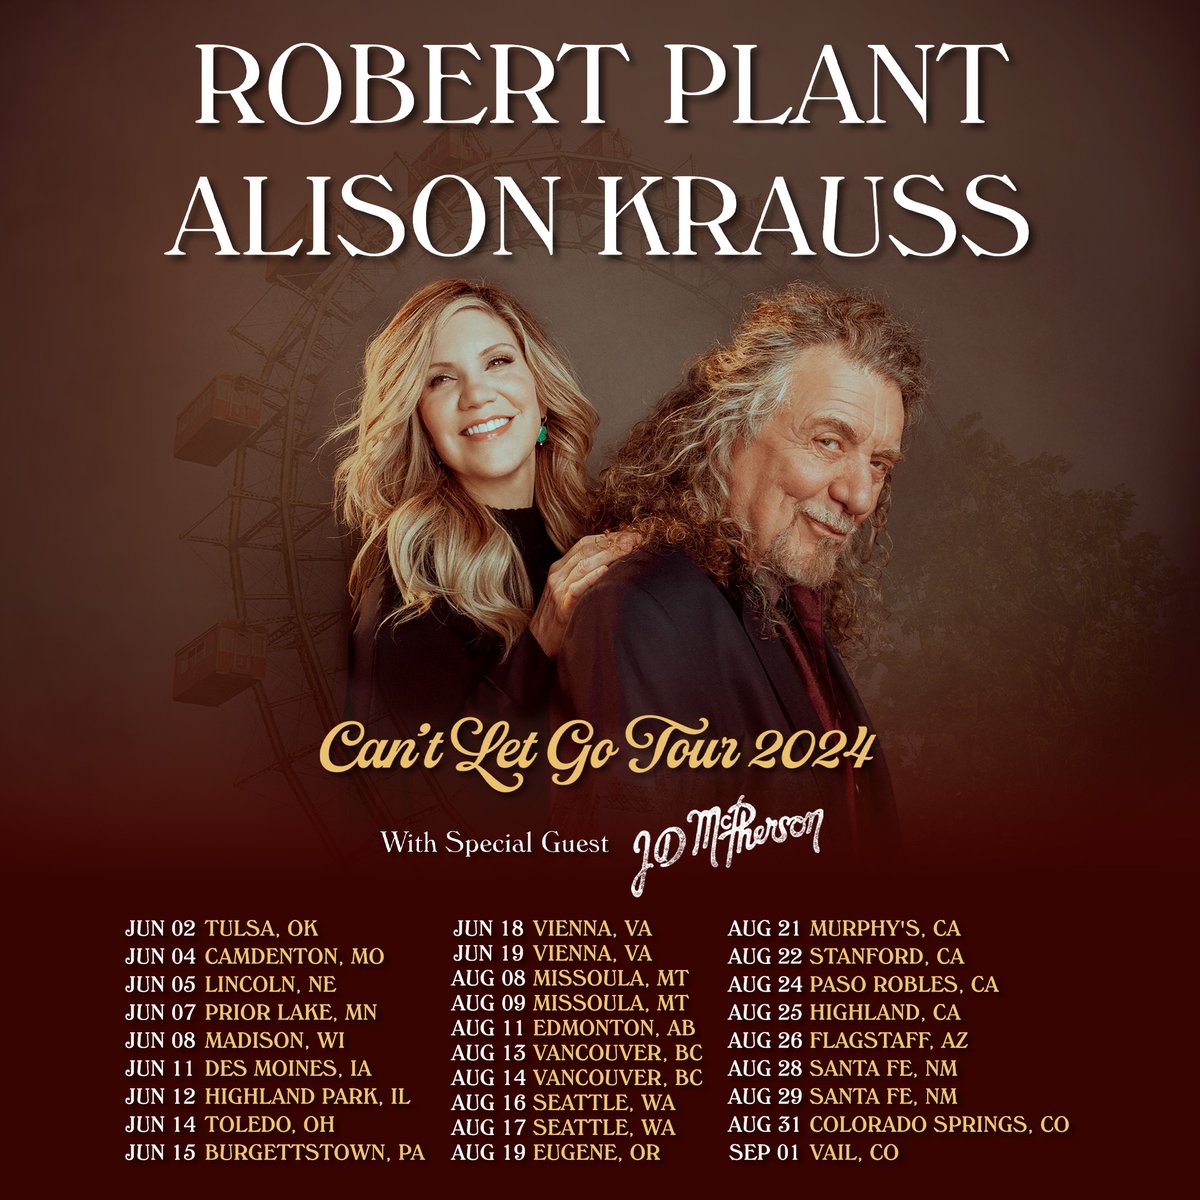 .@RobertPlant & Alison are hitting the road again this summer. Tickets for the ‘Can't Let Go’ 2024 tour will be on sale this Friday, February 16 at plantkrauss.com. Mark your calendar for 10am local time. #PlantKraussTour #CantLetGo #Live